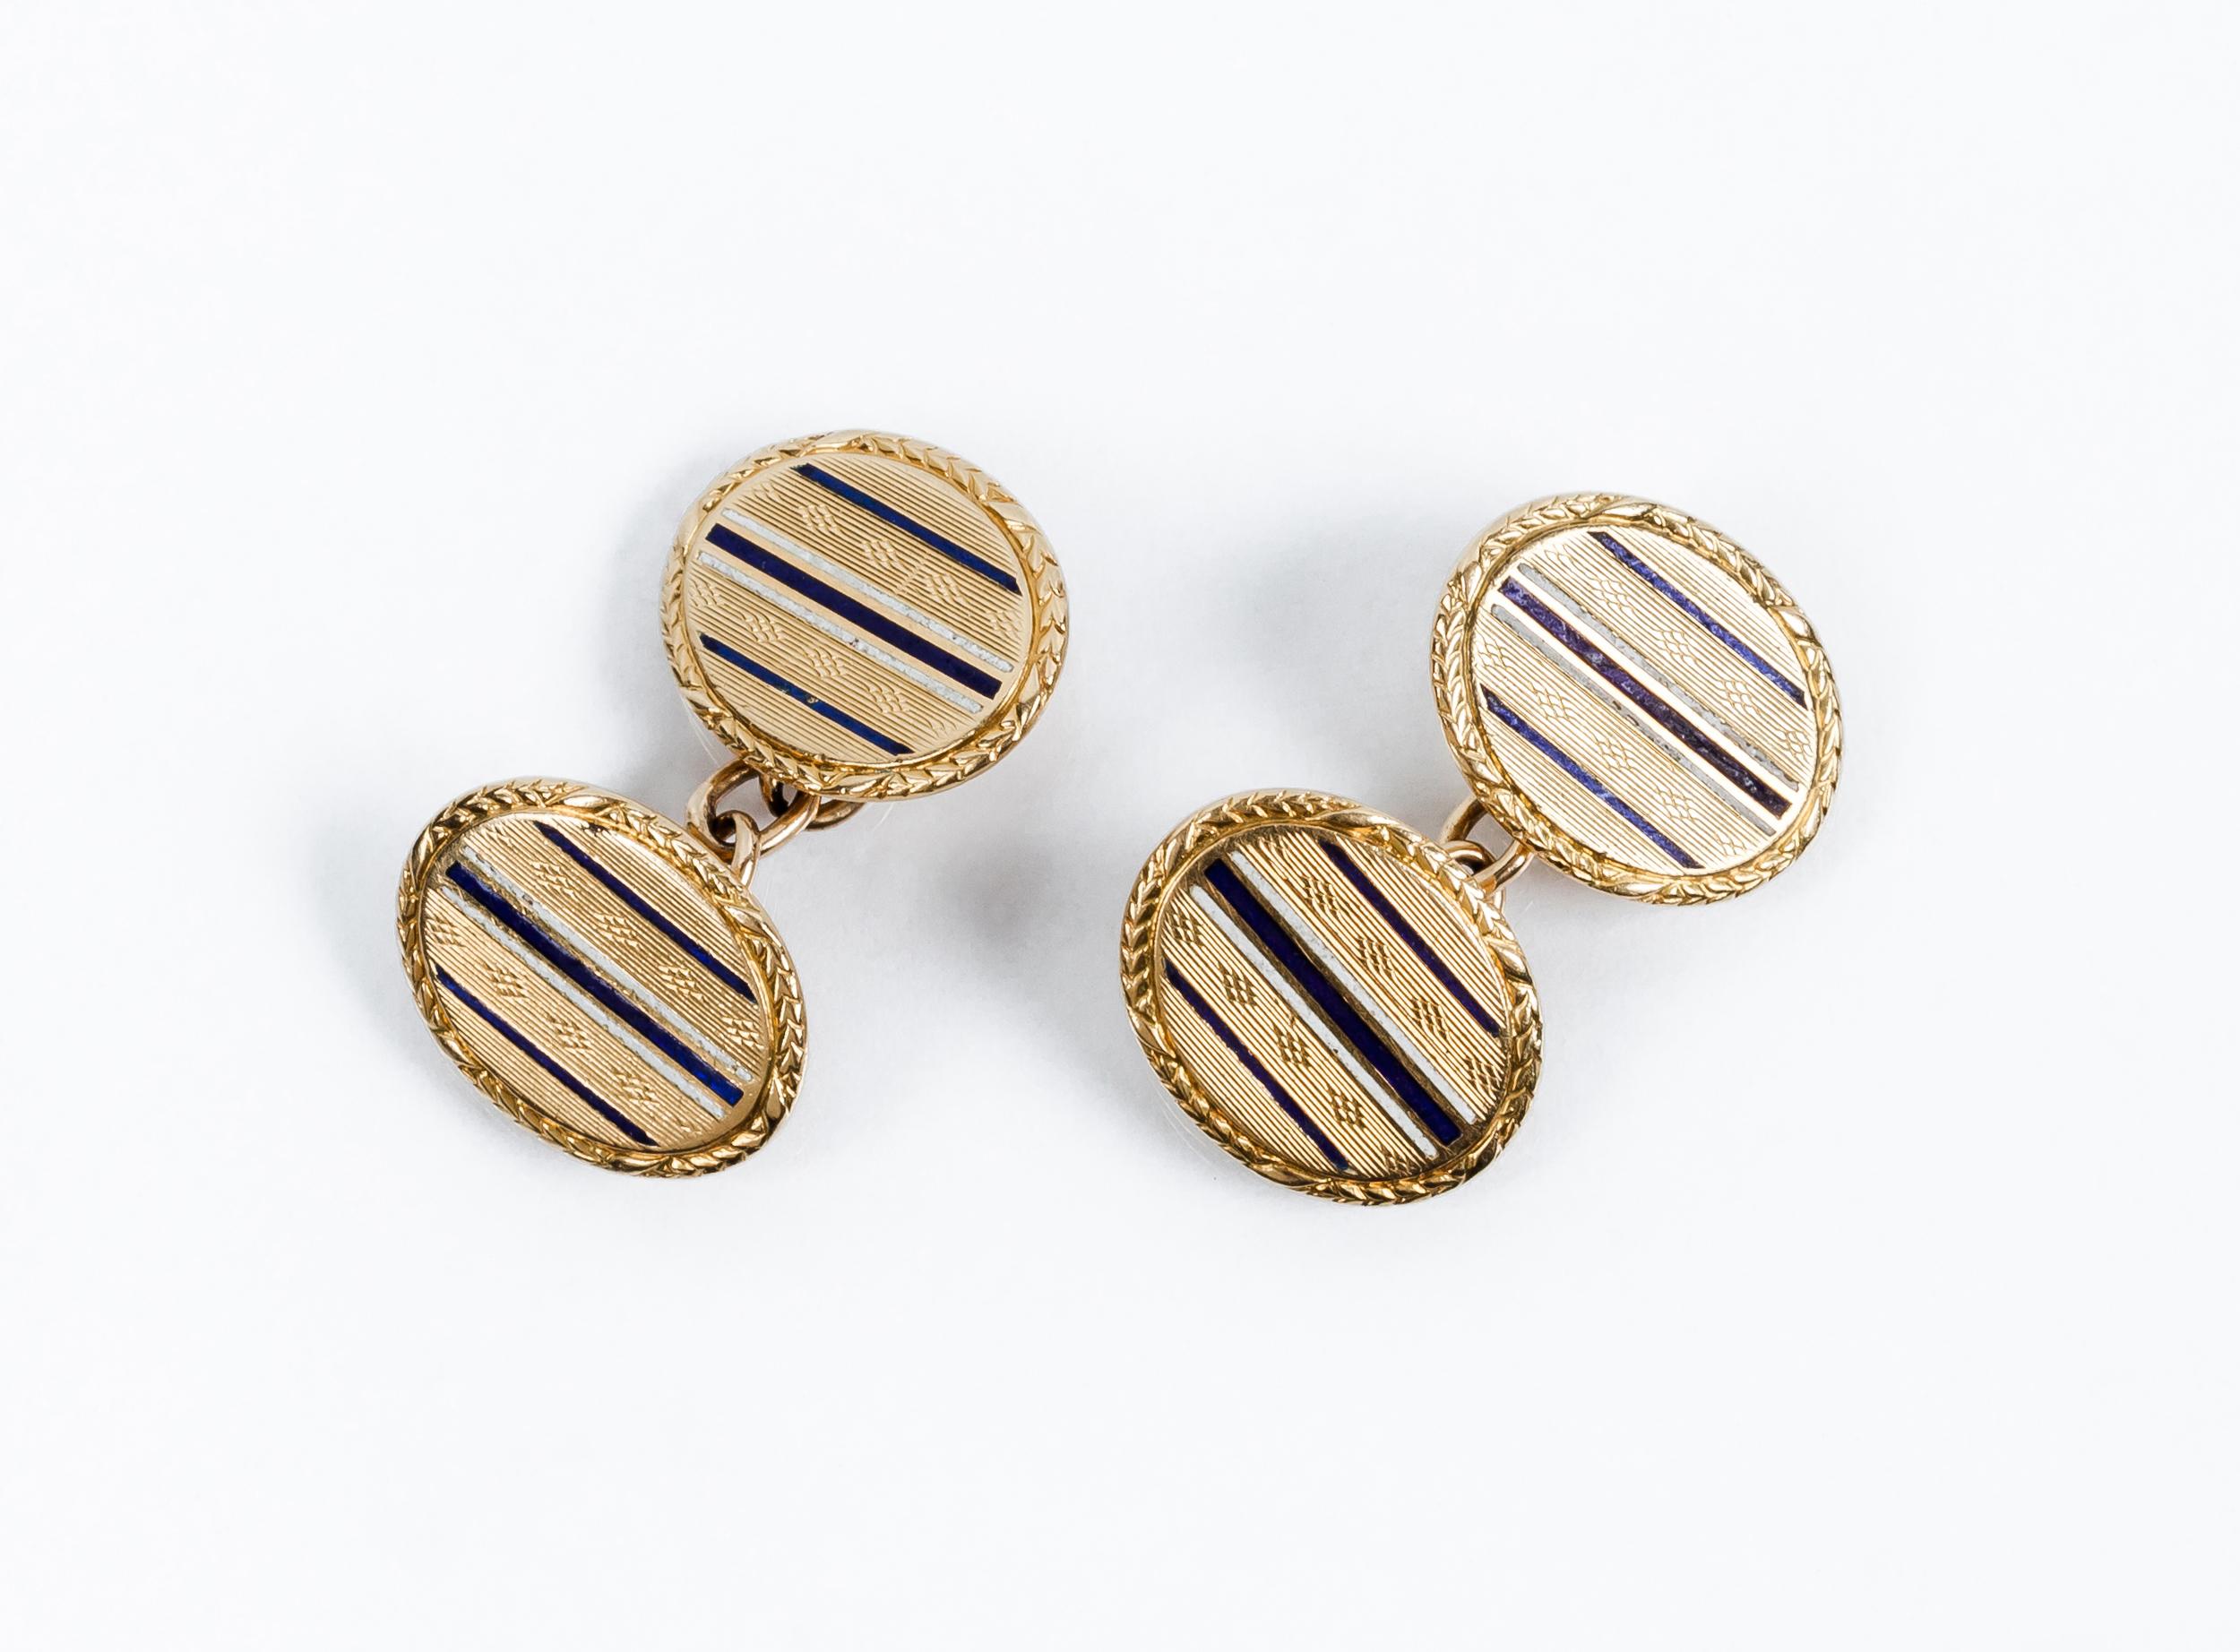 Vintage Oval Yellow Gold Cufflinks
Vintage cufflinks in yellow gold with double oval motifs, decorated in alternating engraved bands with blue and white enamel lines
Weight 8,5 gr
 Dimensions  14 x 12 mm

PRADERA is a second generation of a family